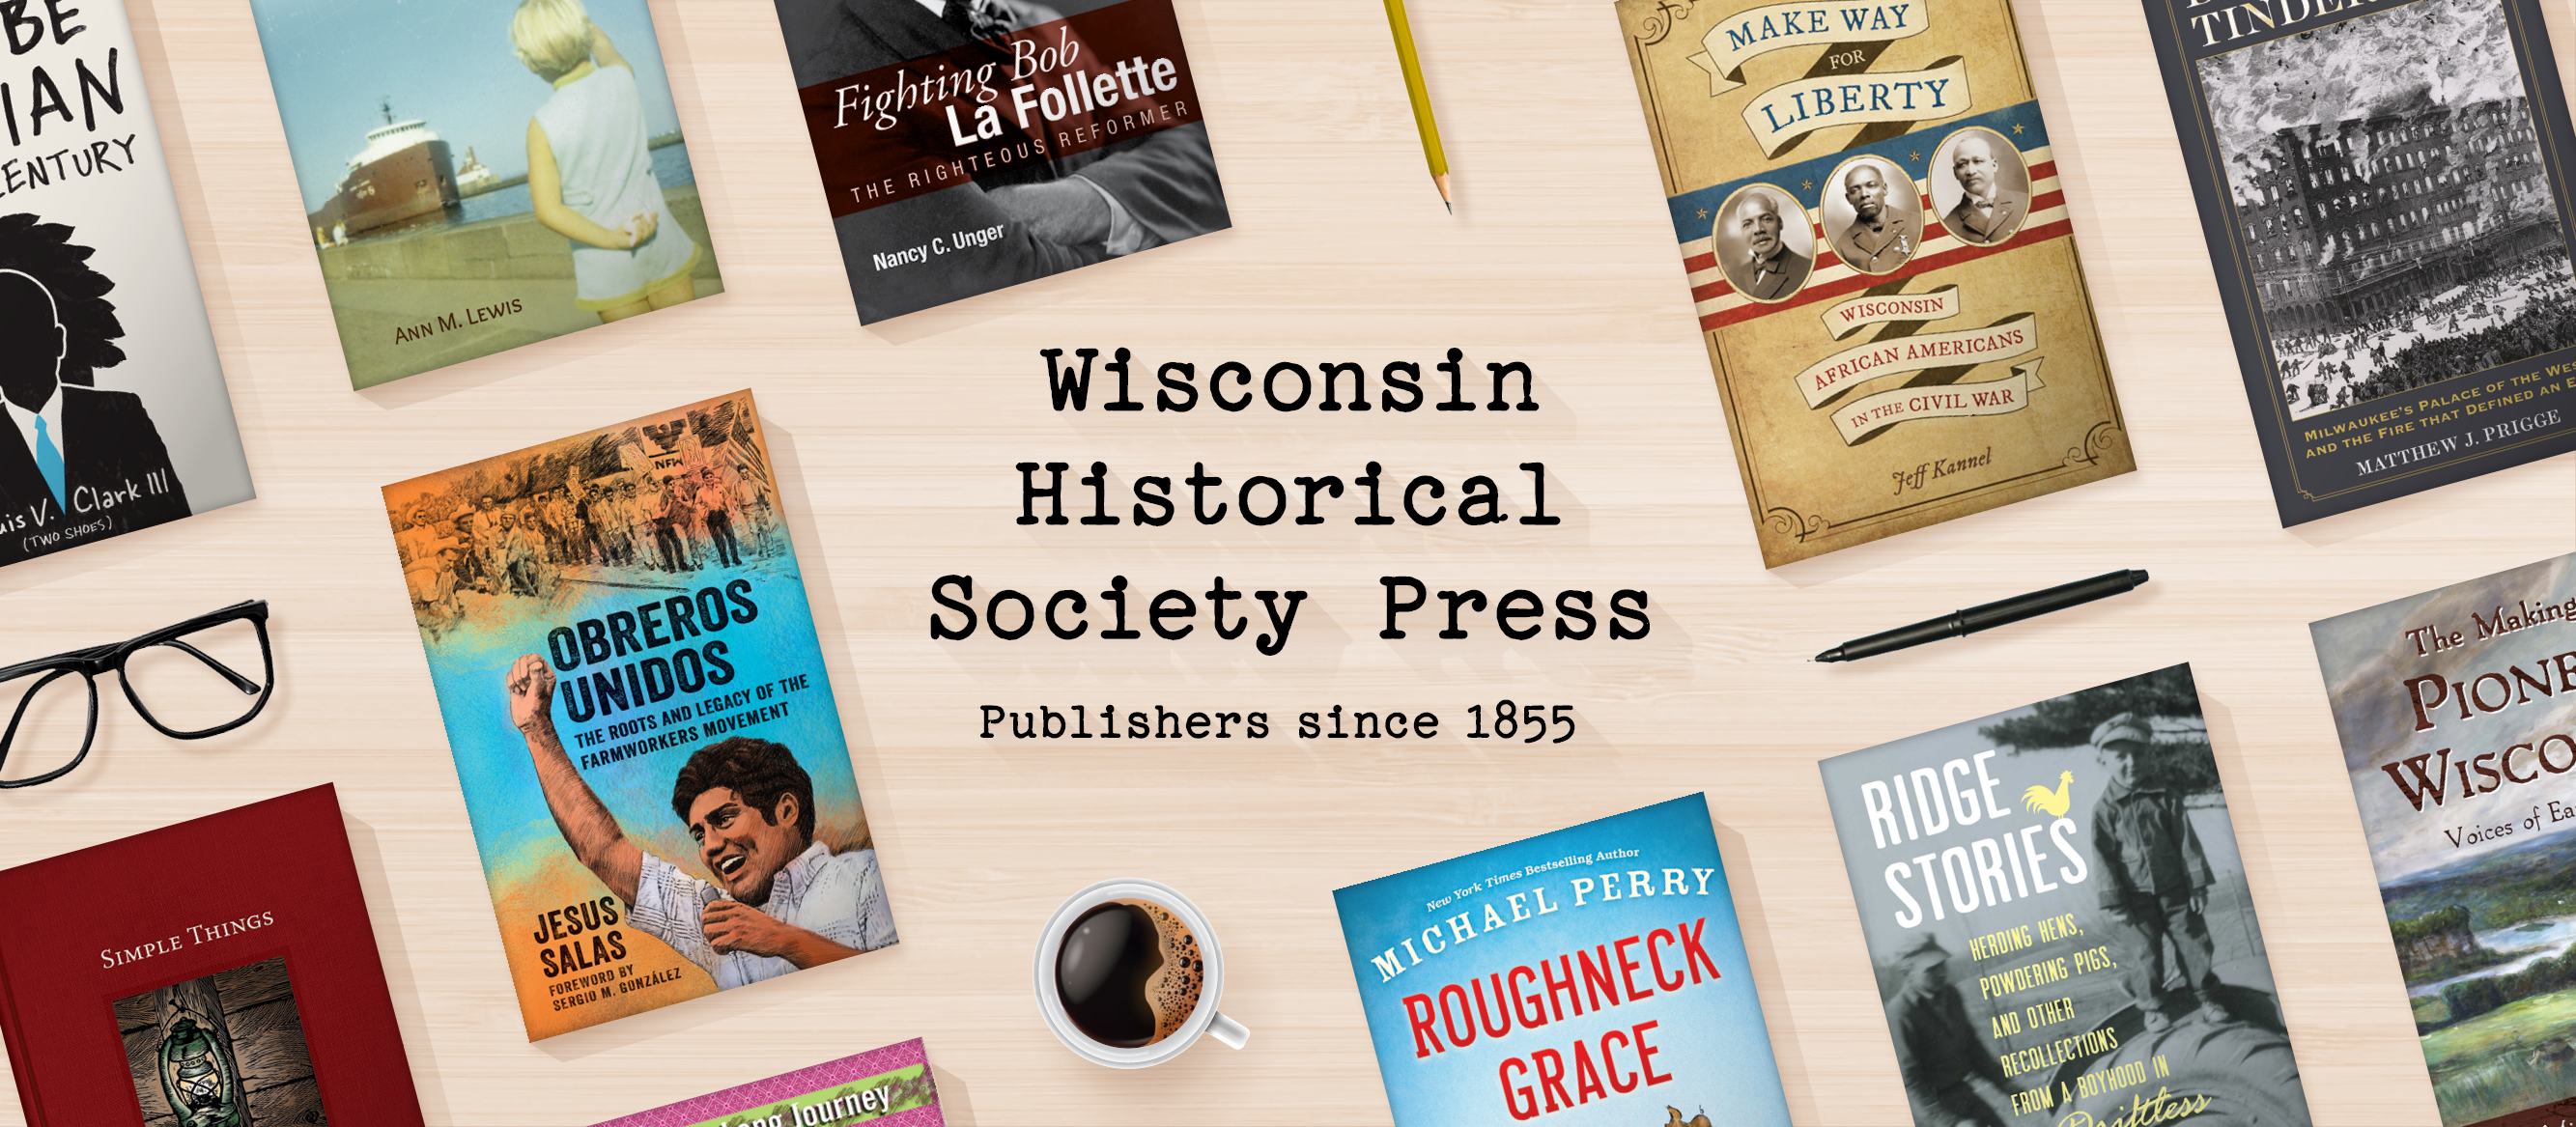 Wisconsin Historical Society Press - Publishers since 1855 - Discussion Page 